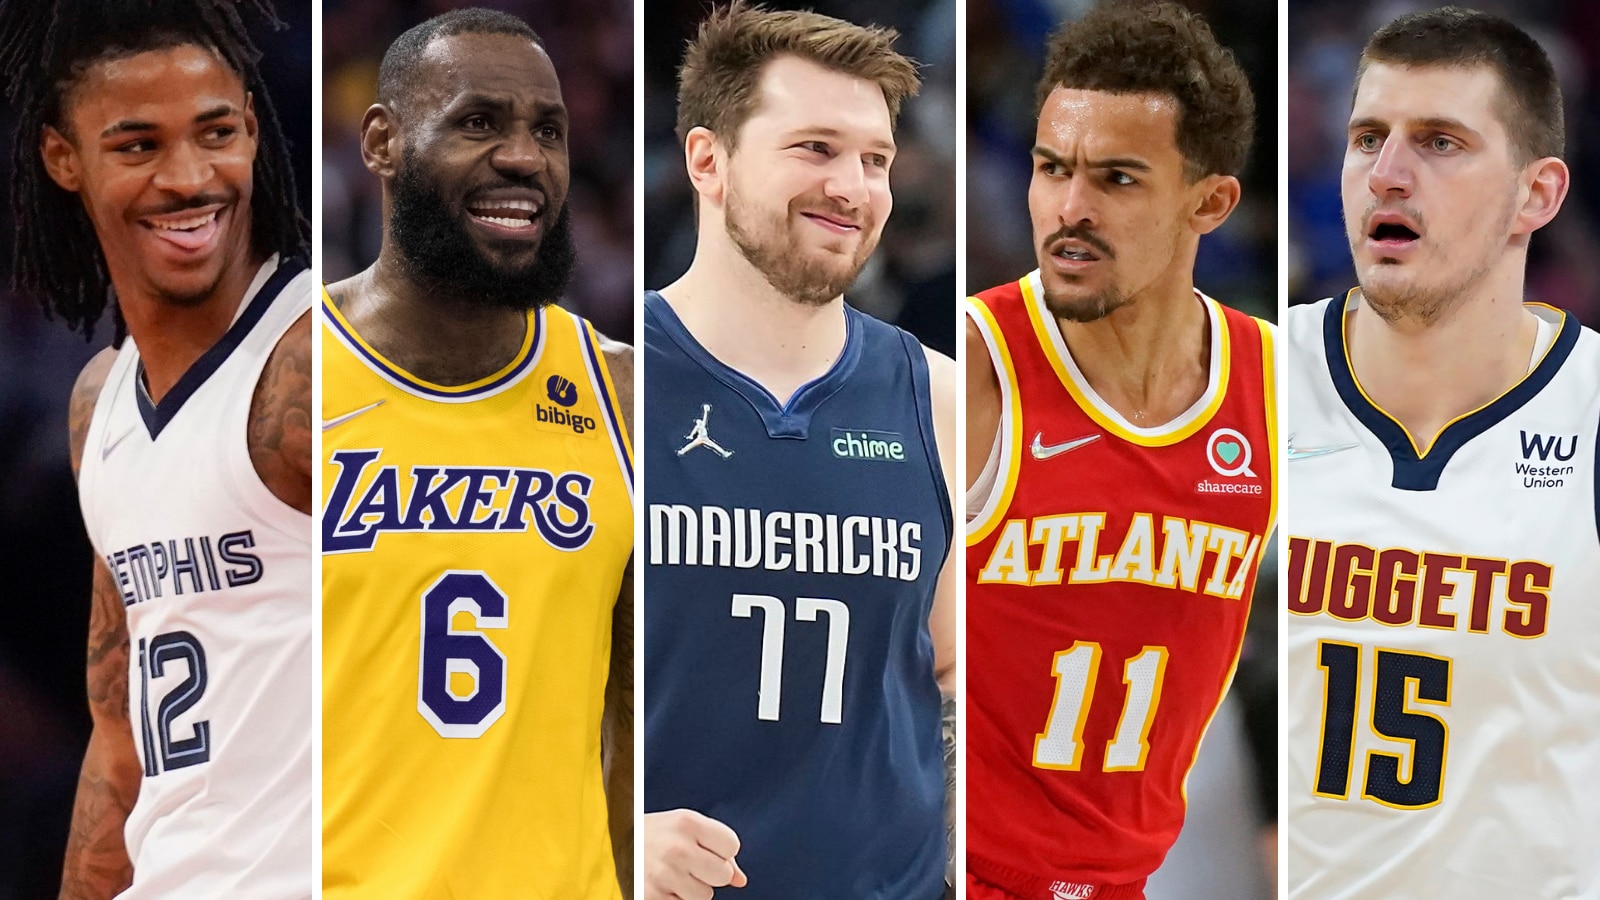 Love Everything About Him': LeBron James, Fellow All Stars Have Big Praise, Sarcasm For Luka Doncic